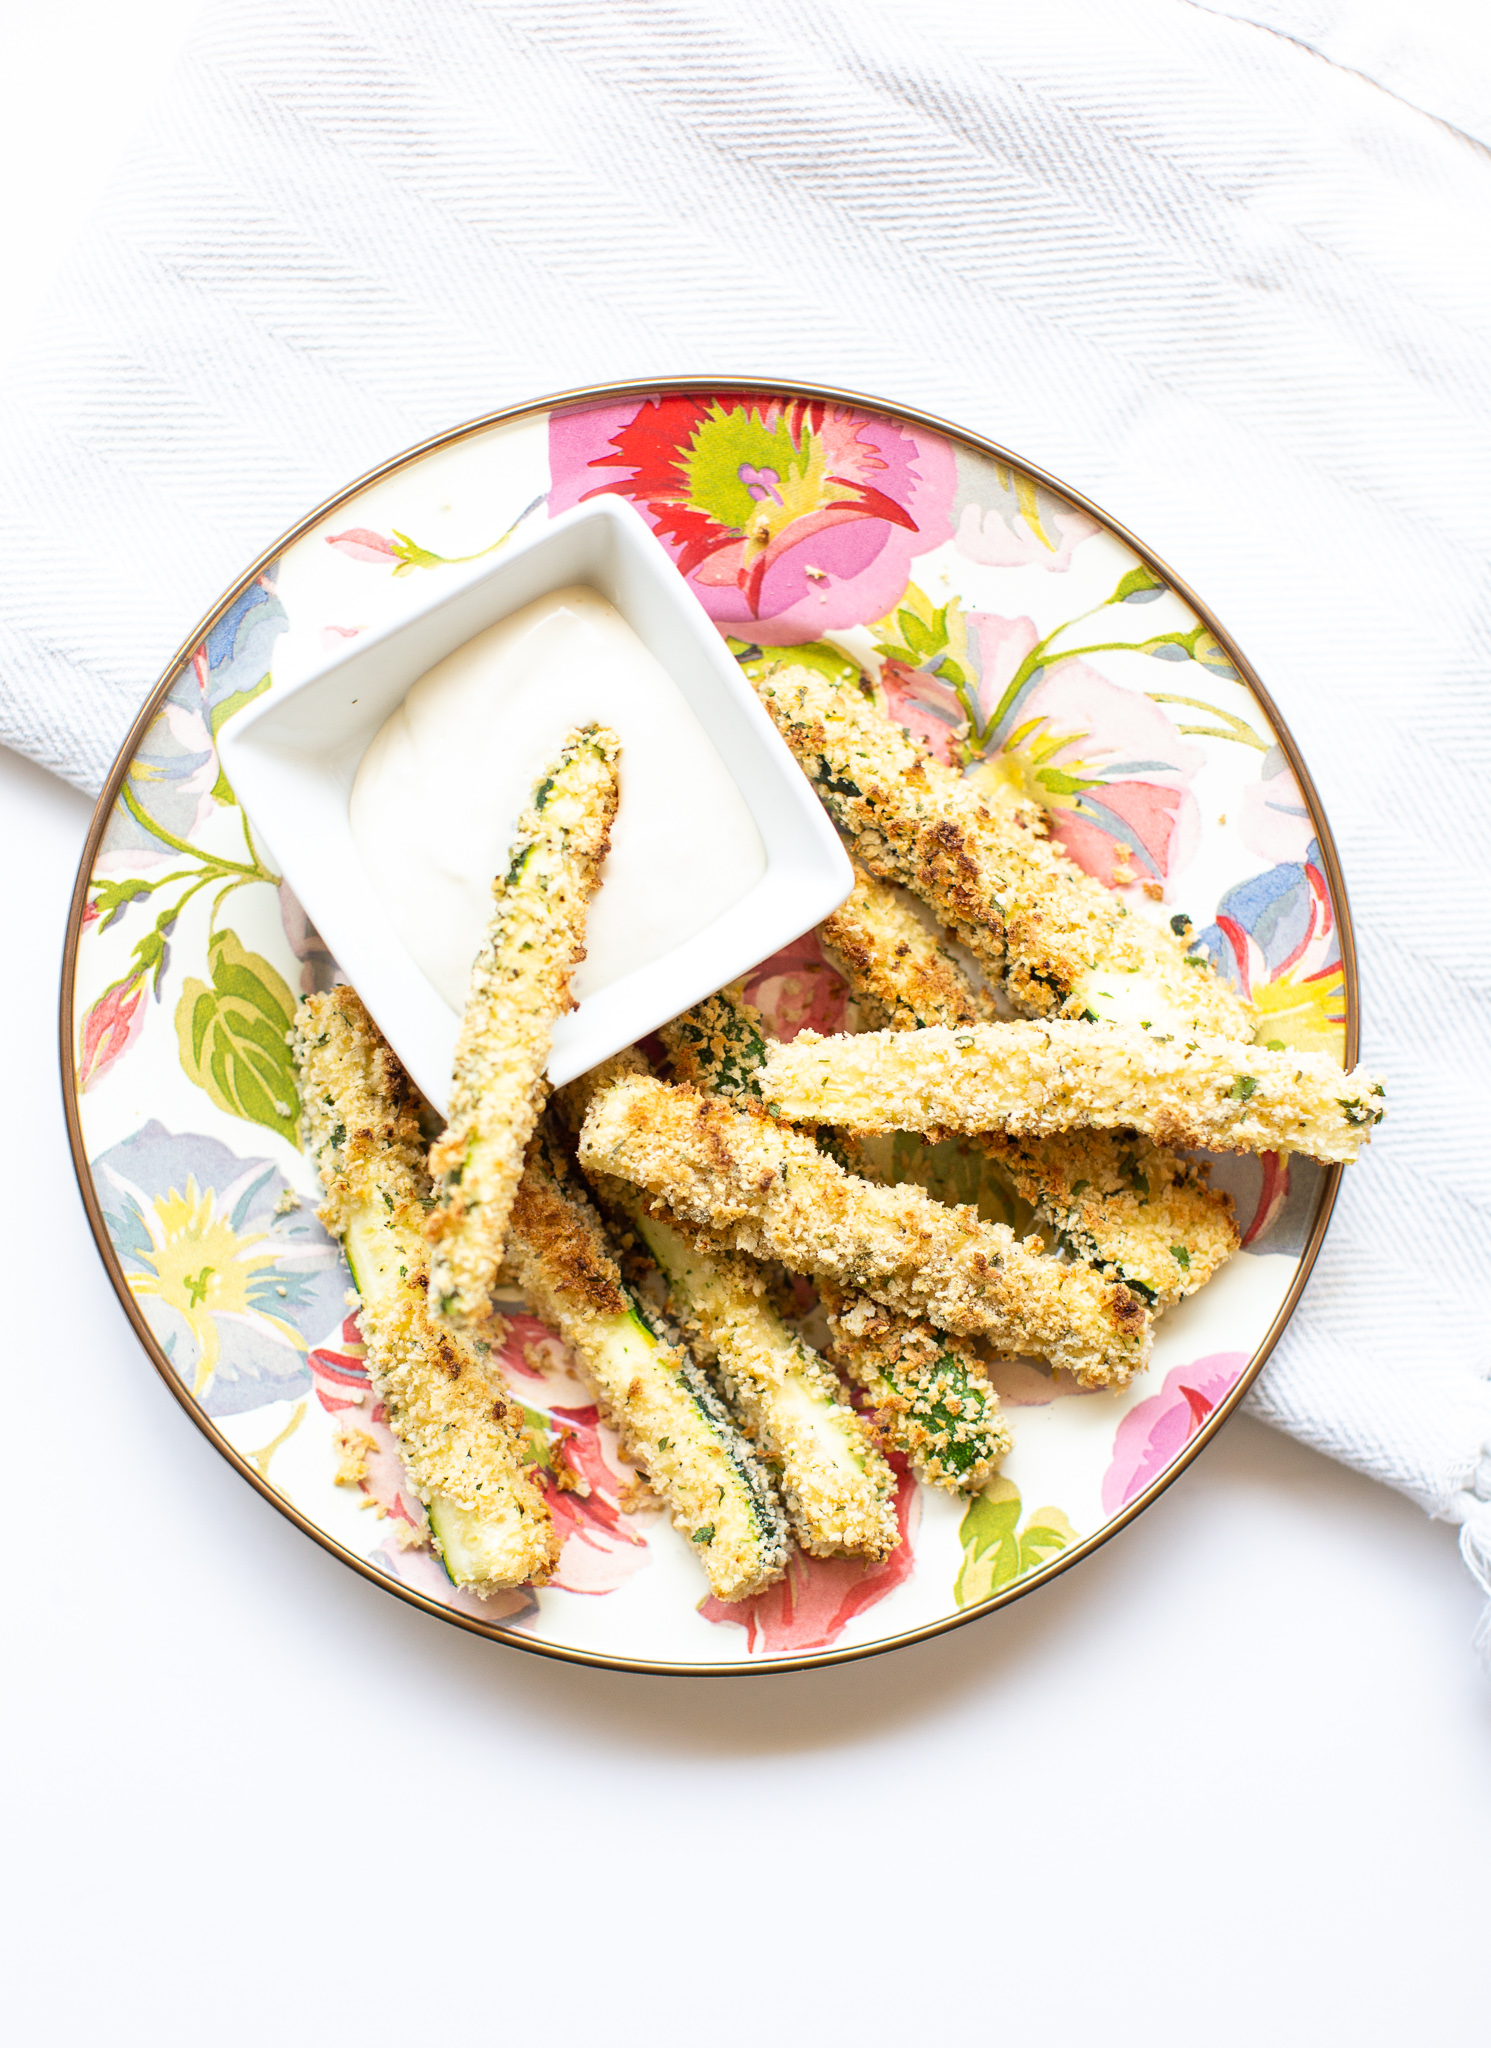 Ranch Zucchini Fries Recipe featured by popular North Carolina lifestyle blogger, Coffee Beans and Bobby Pins